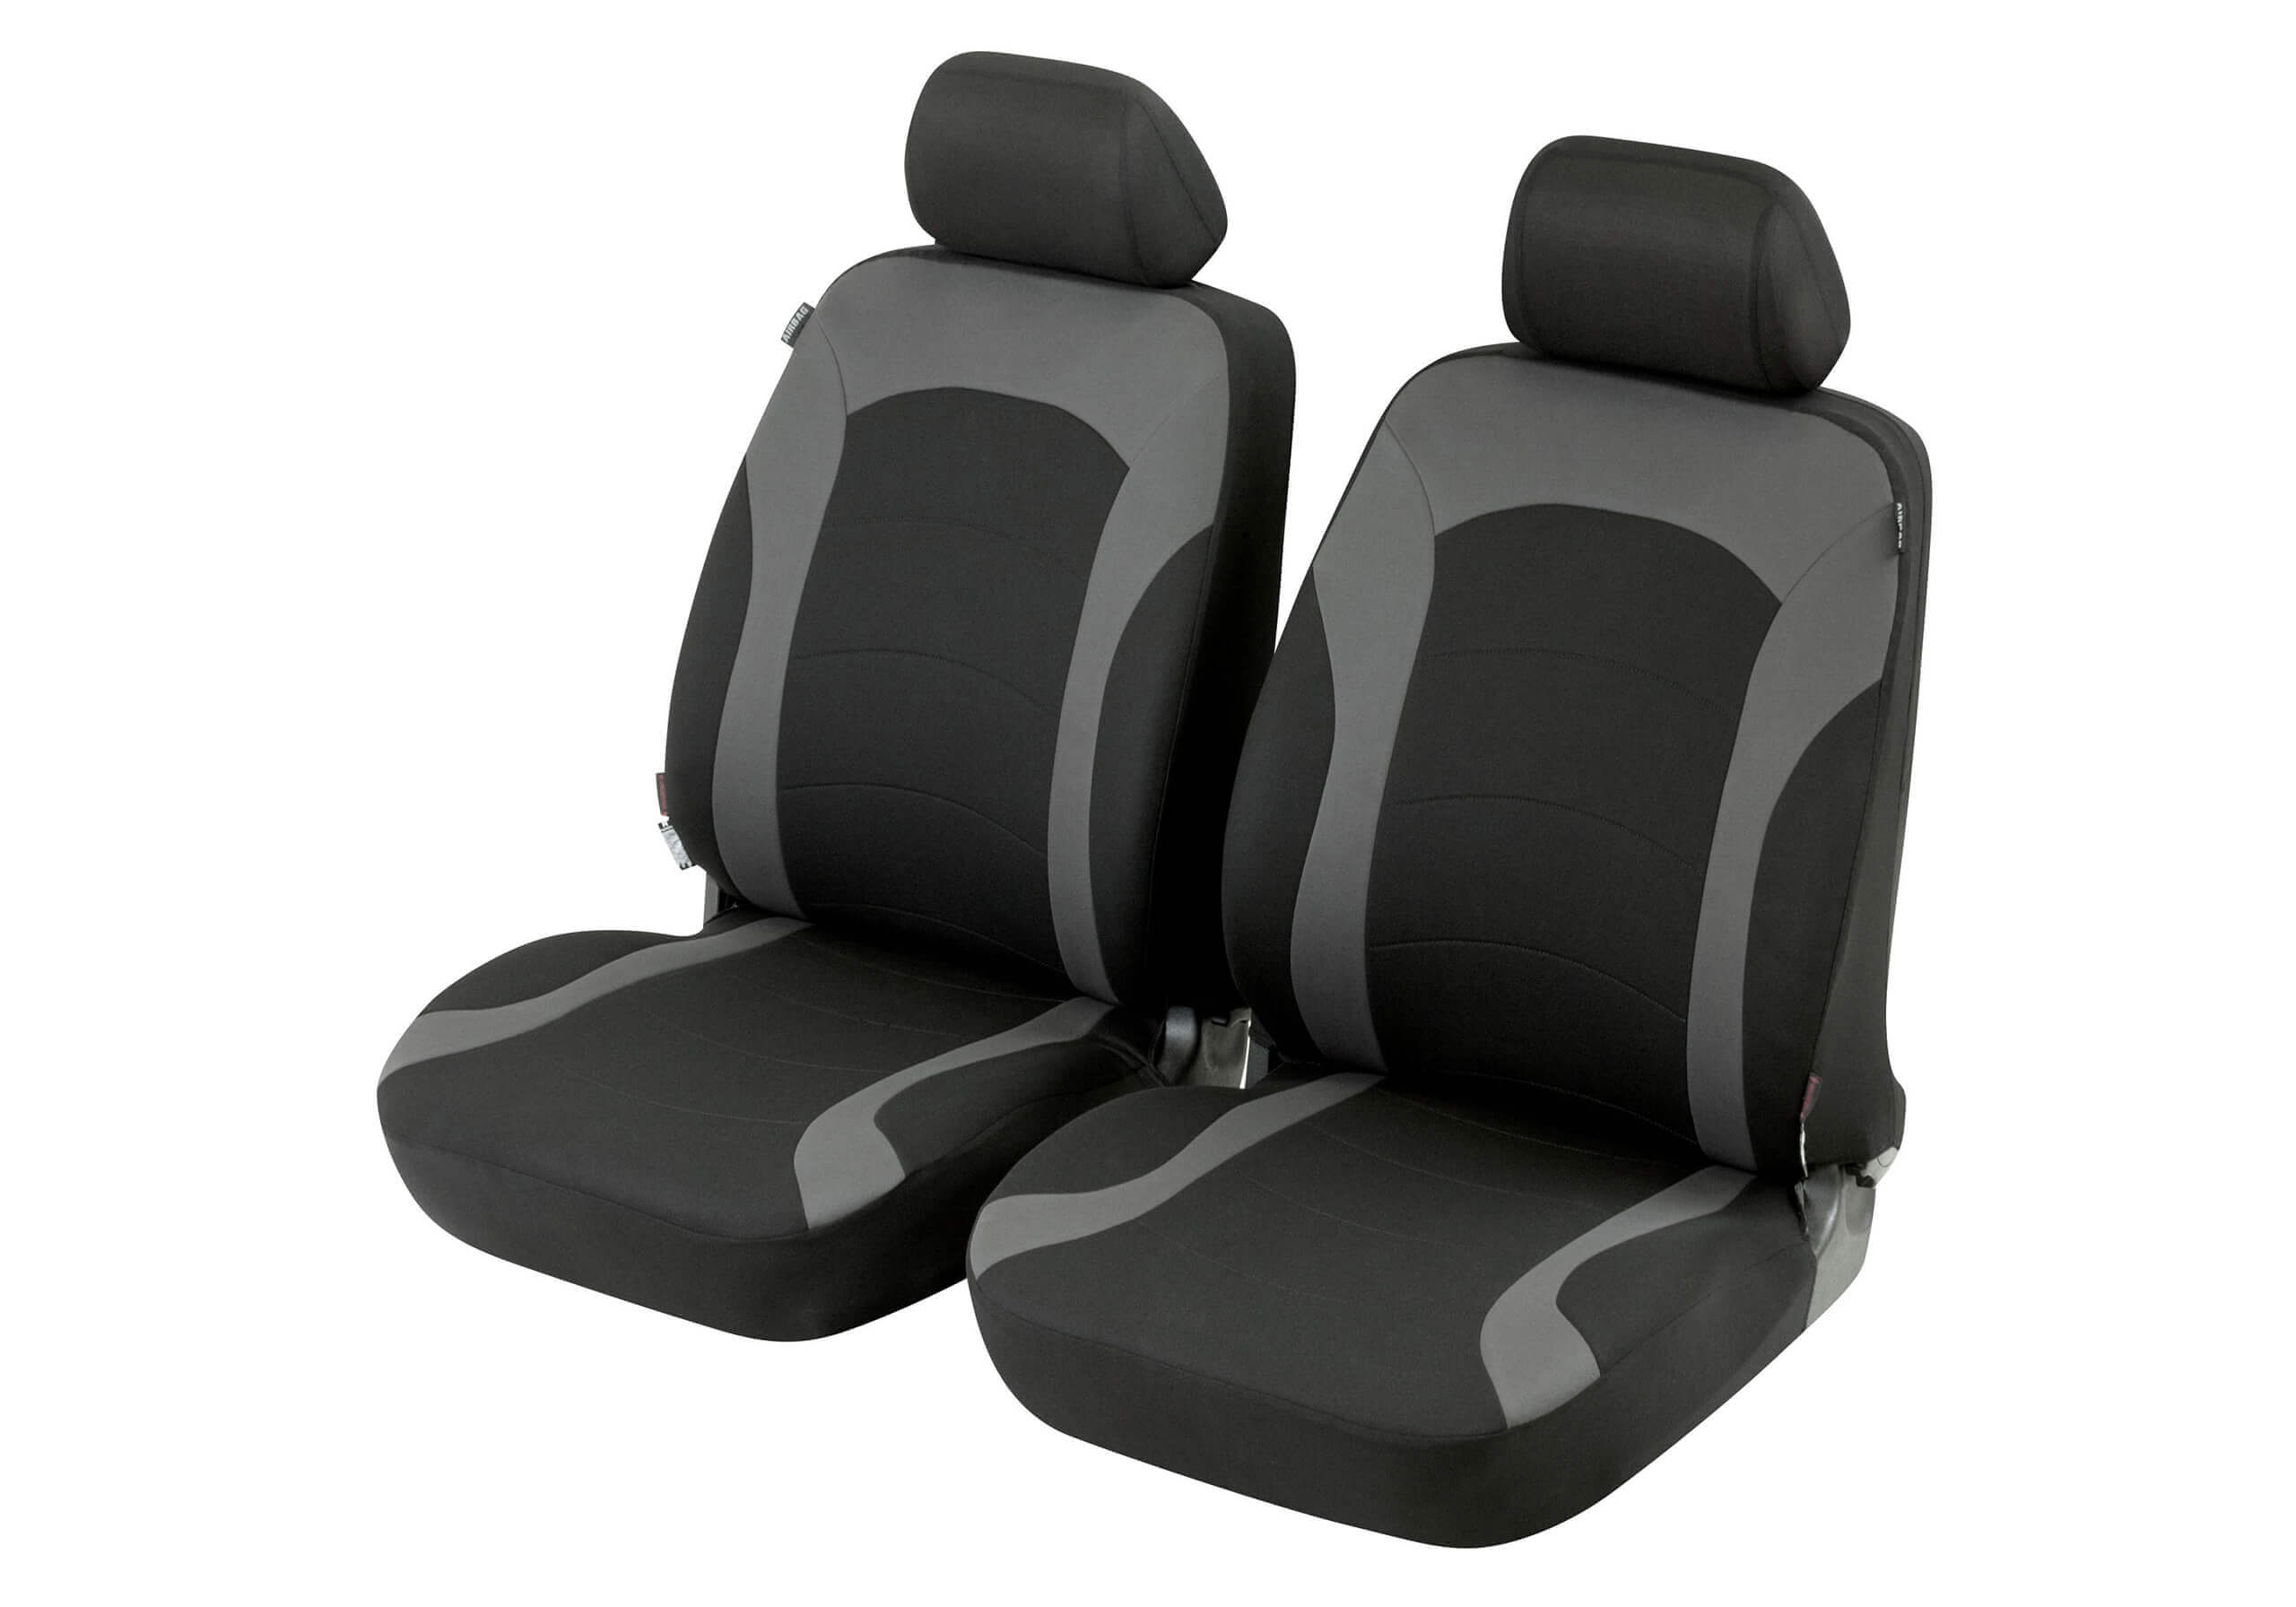 Nissan Navara double cab (2002 to 2005):Walser ZIPP-IT seat covers, front seats only, Inde black-grey, 11785